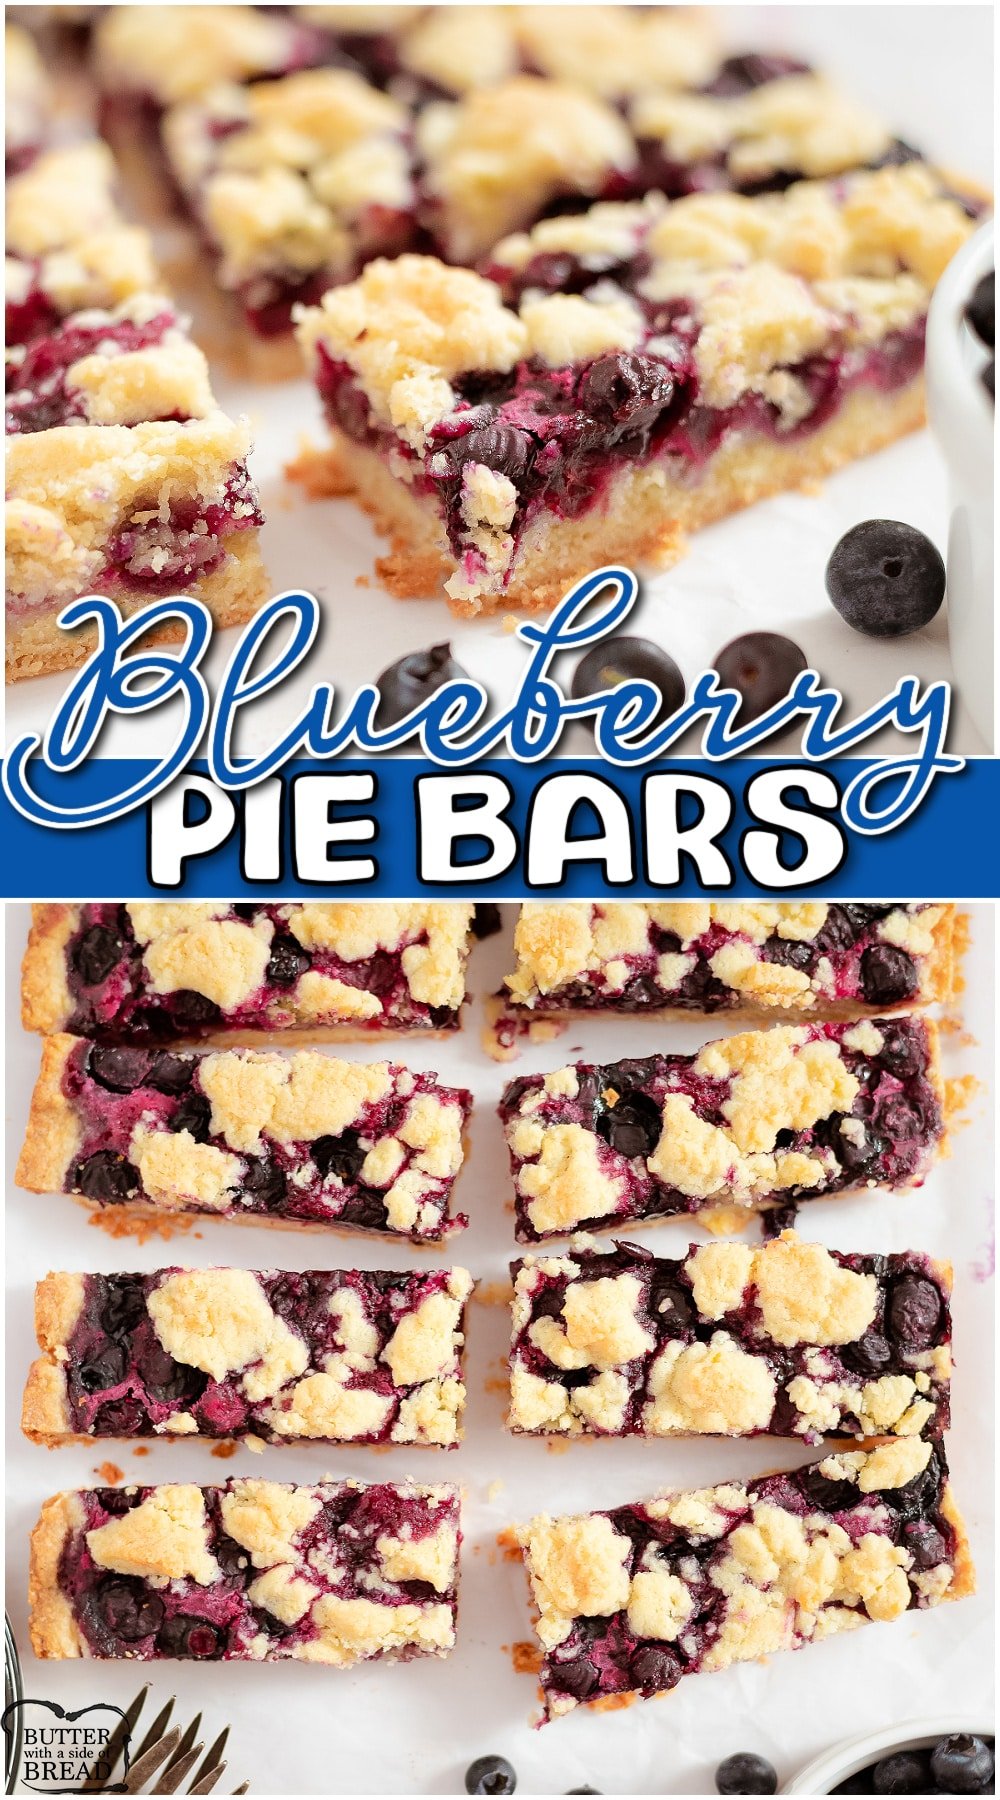 Homemade blueberry pie bars made with fresh blueberries & buttery pie crust! Simple take on blueberry pie that serves a crowd!